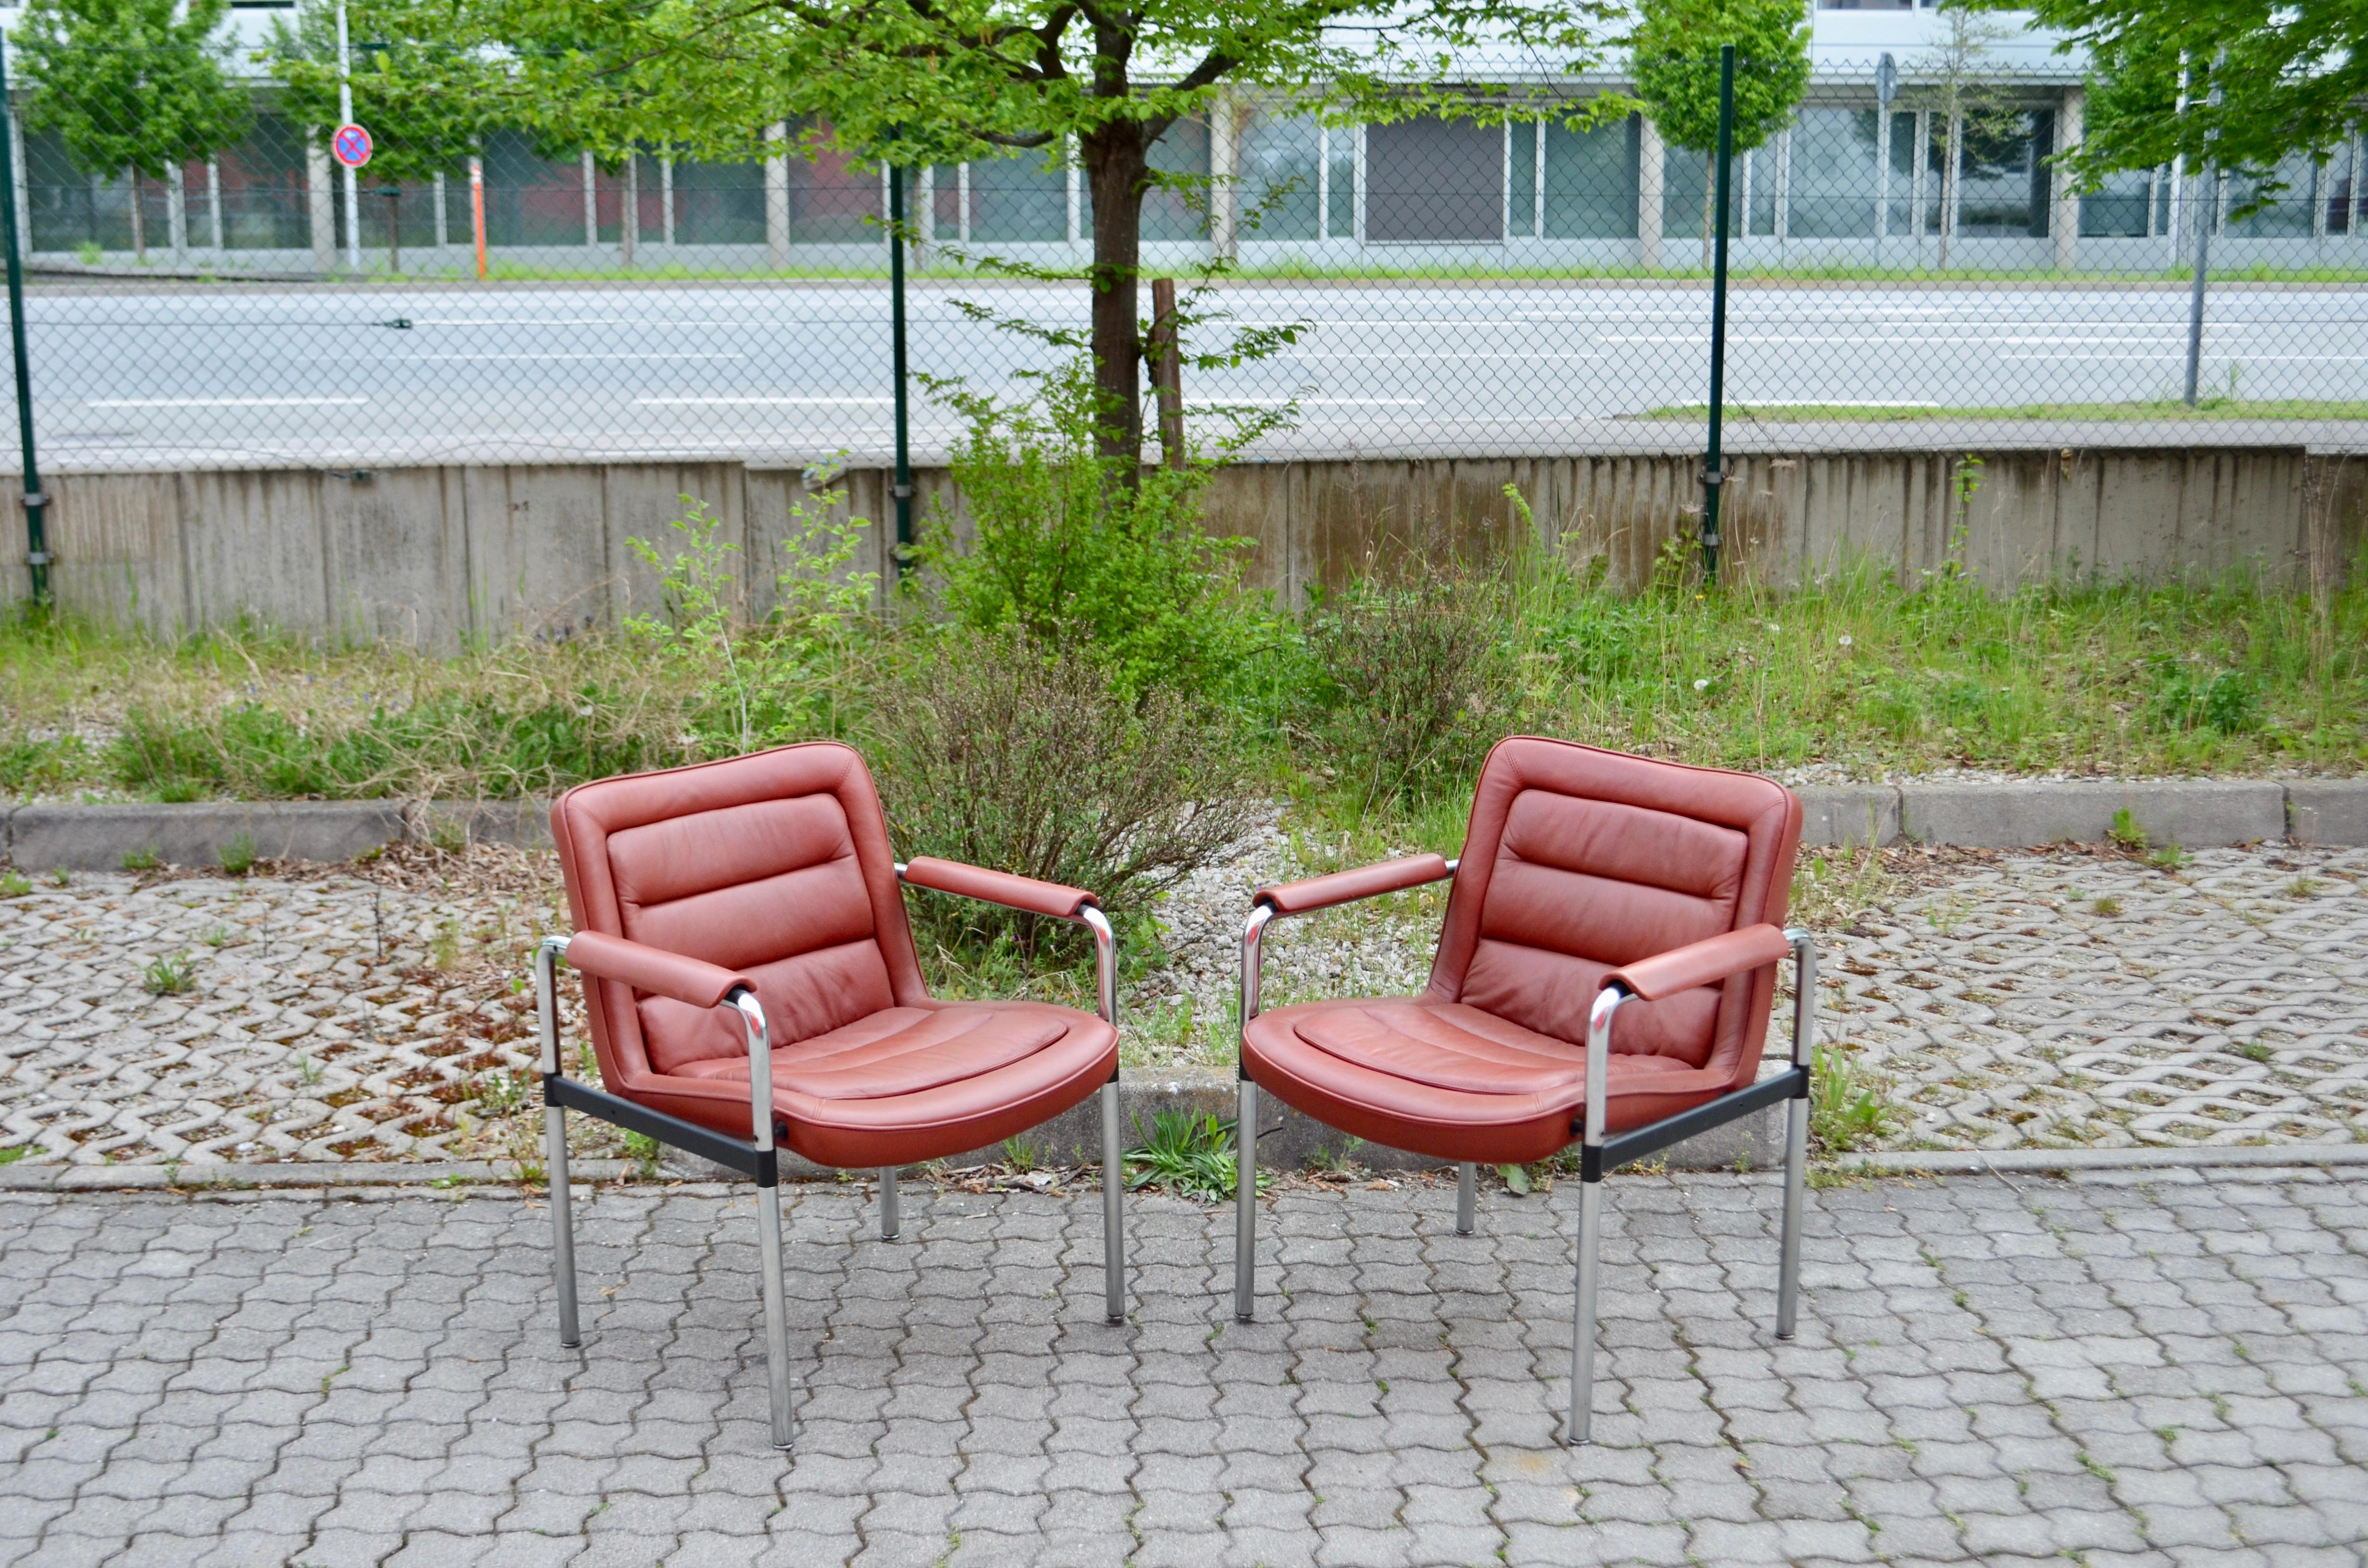 This armchair modell series 8400 was designed by Jorgen Kastholm for Kusch + Co 
The pieces comprise matte-chromed tubular steel bases and red leather upholstery along with armrests.
The armrests are well patinated
Great seating comfort with the